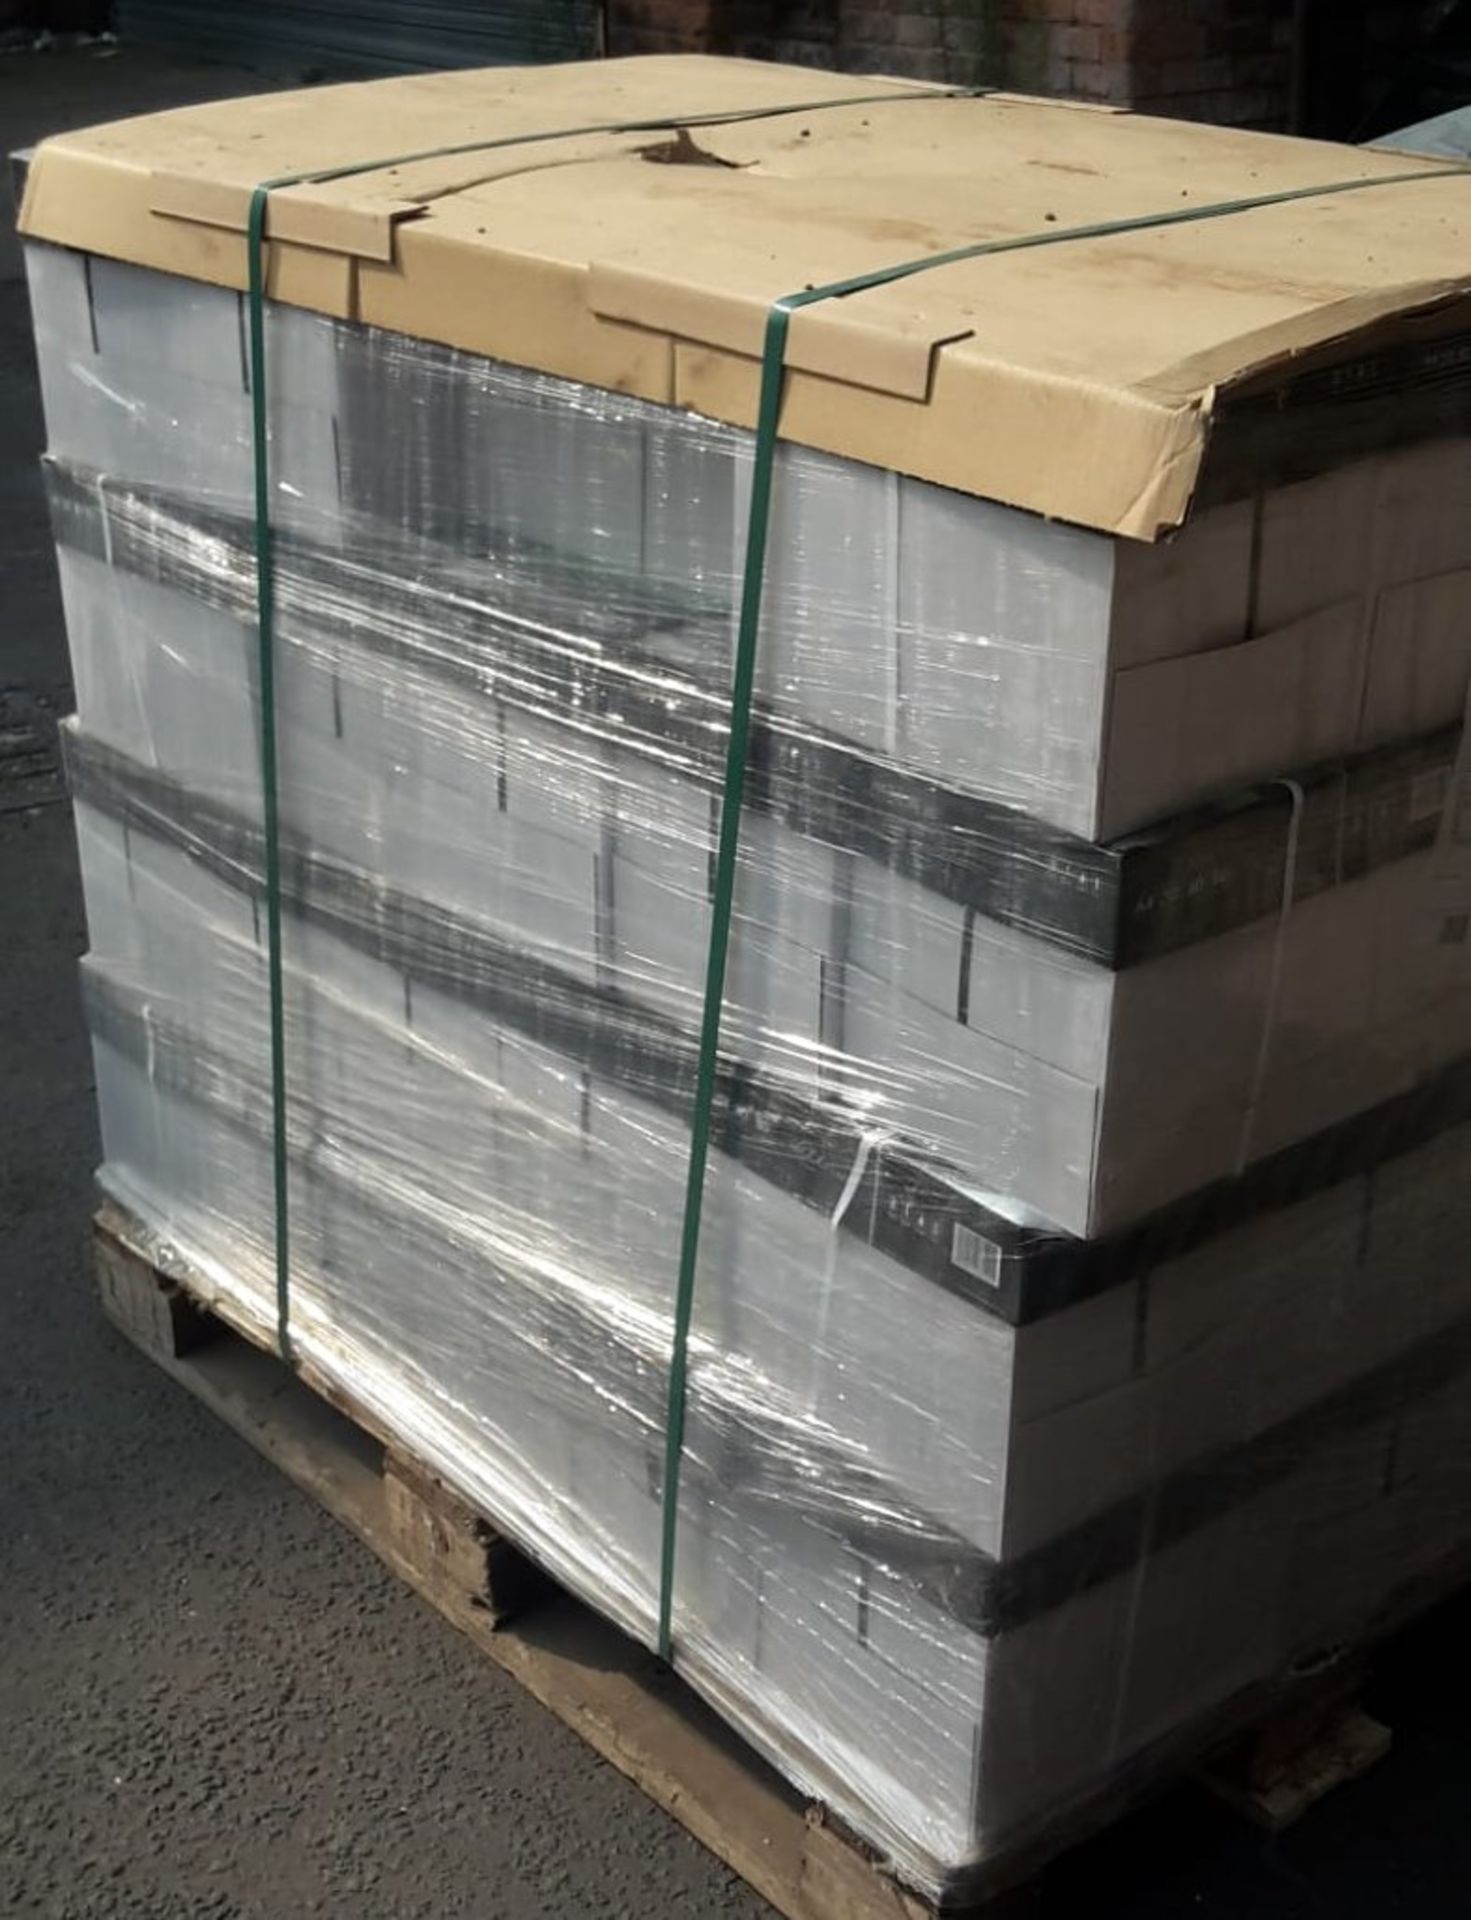 1 Pallet Of Lettura A4 ISO 80 Copier Paper. See Description For Quantity. - Image 5 of 5